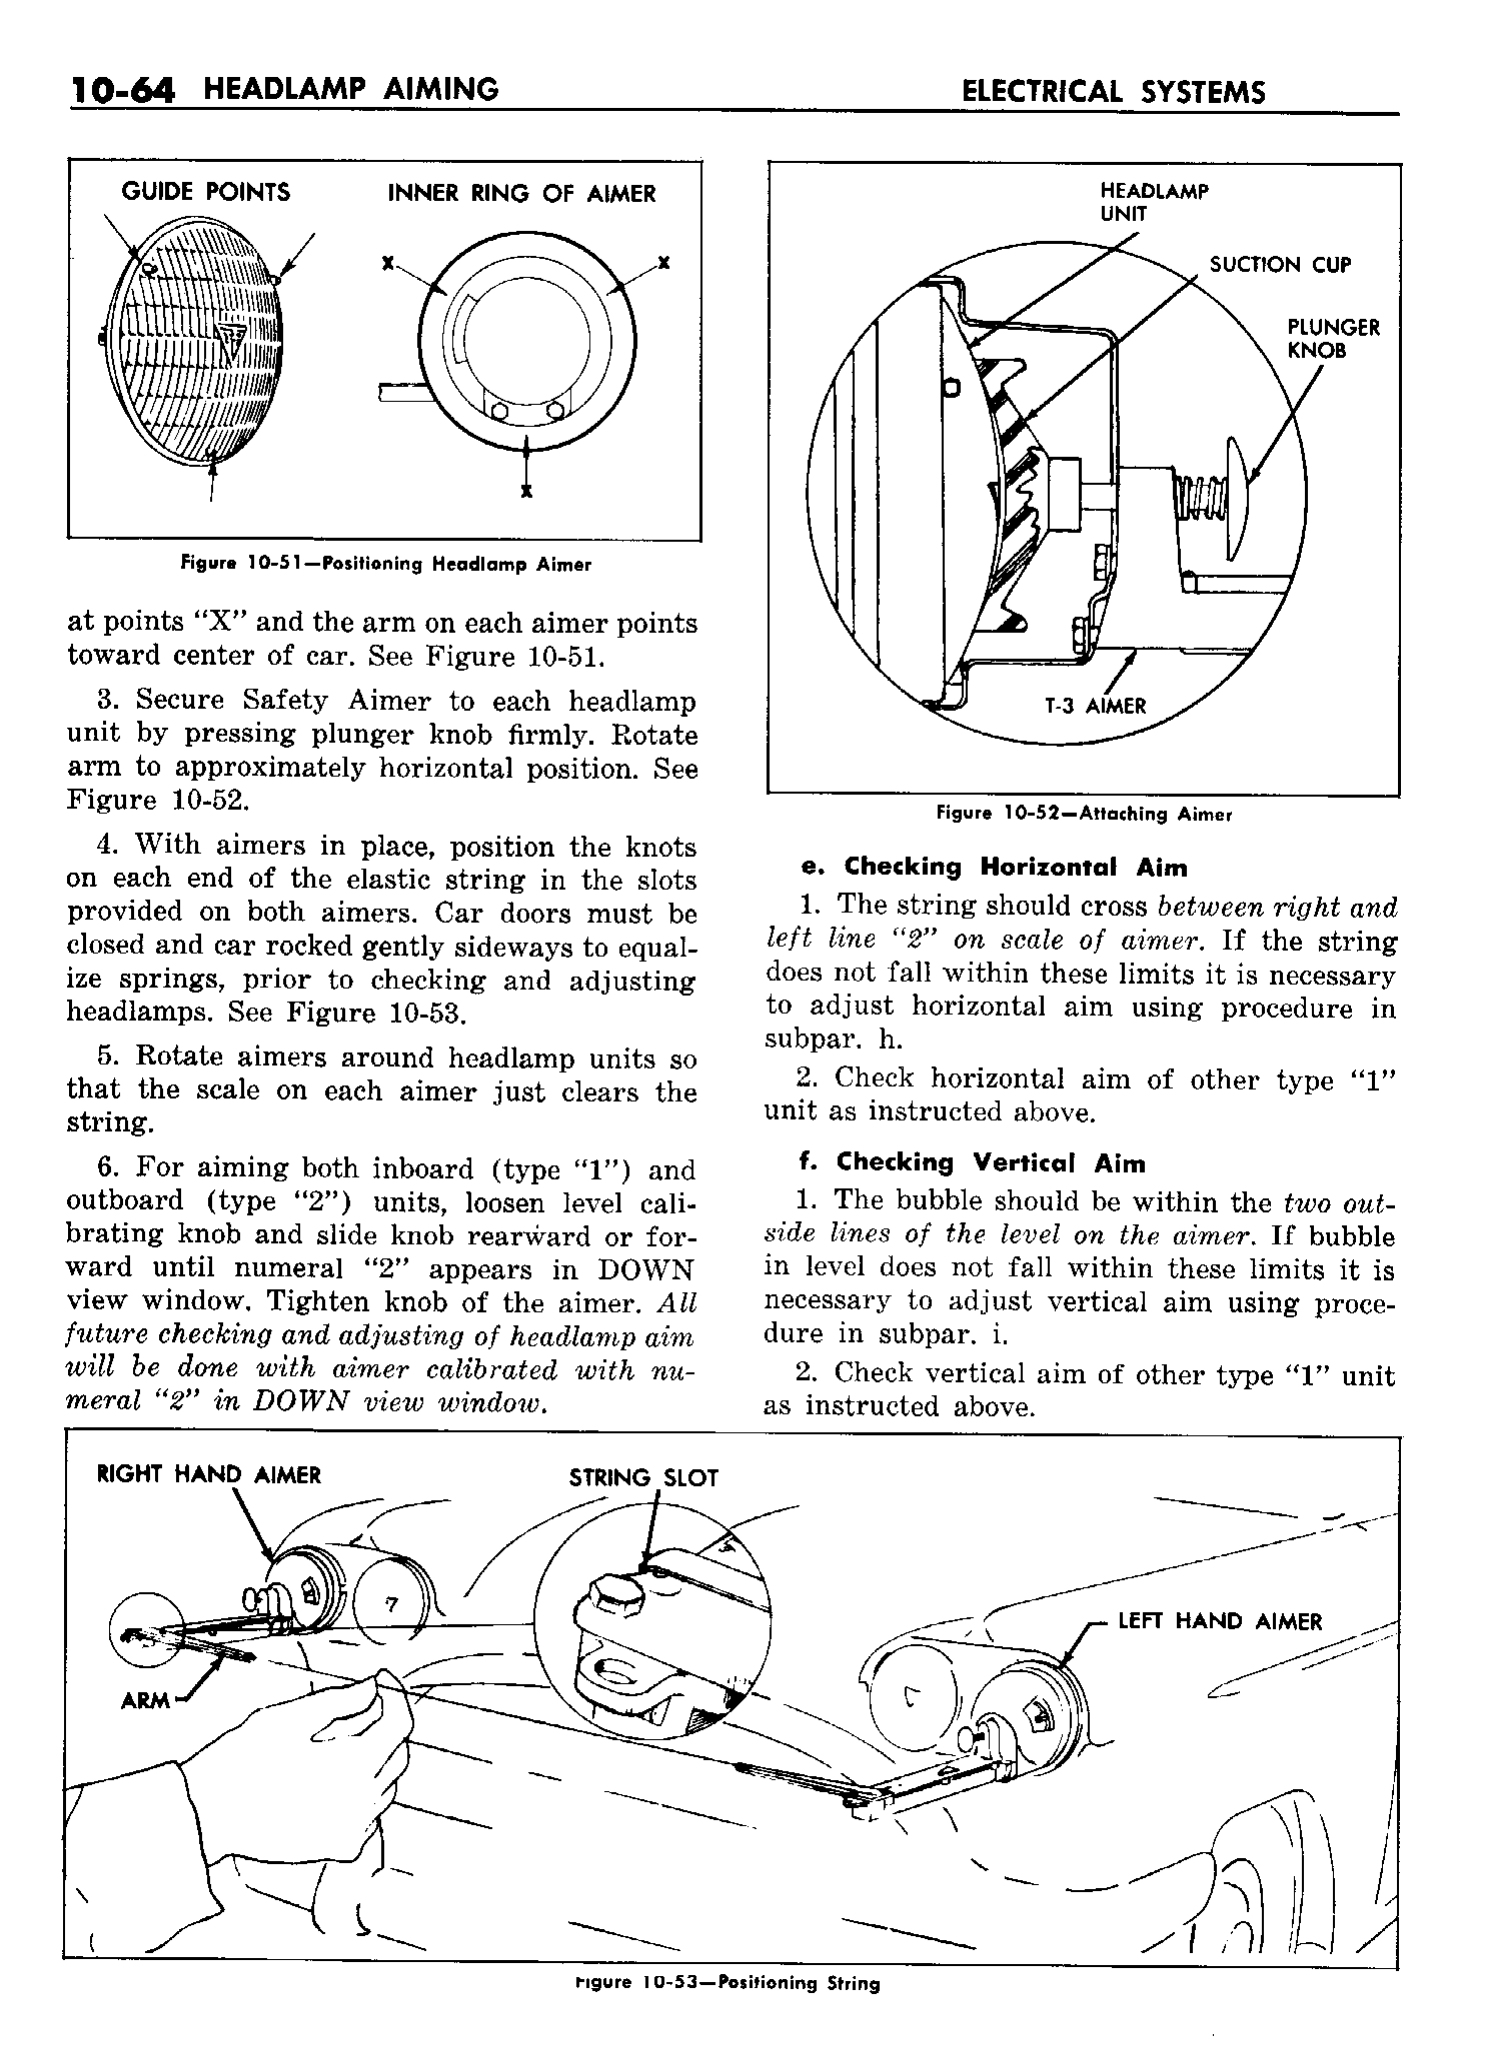 n_11 1958 Buick Shop Manual - Electrical Systems_64.jpg